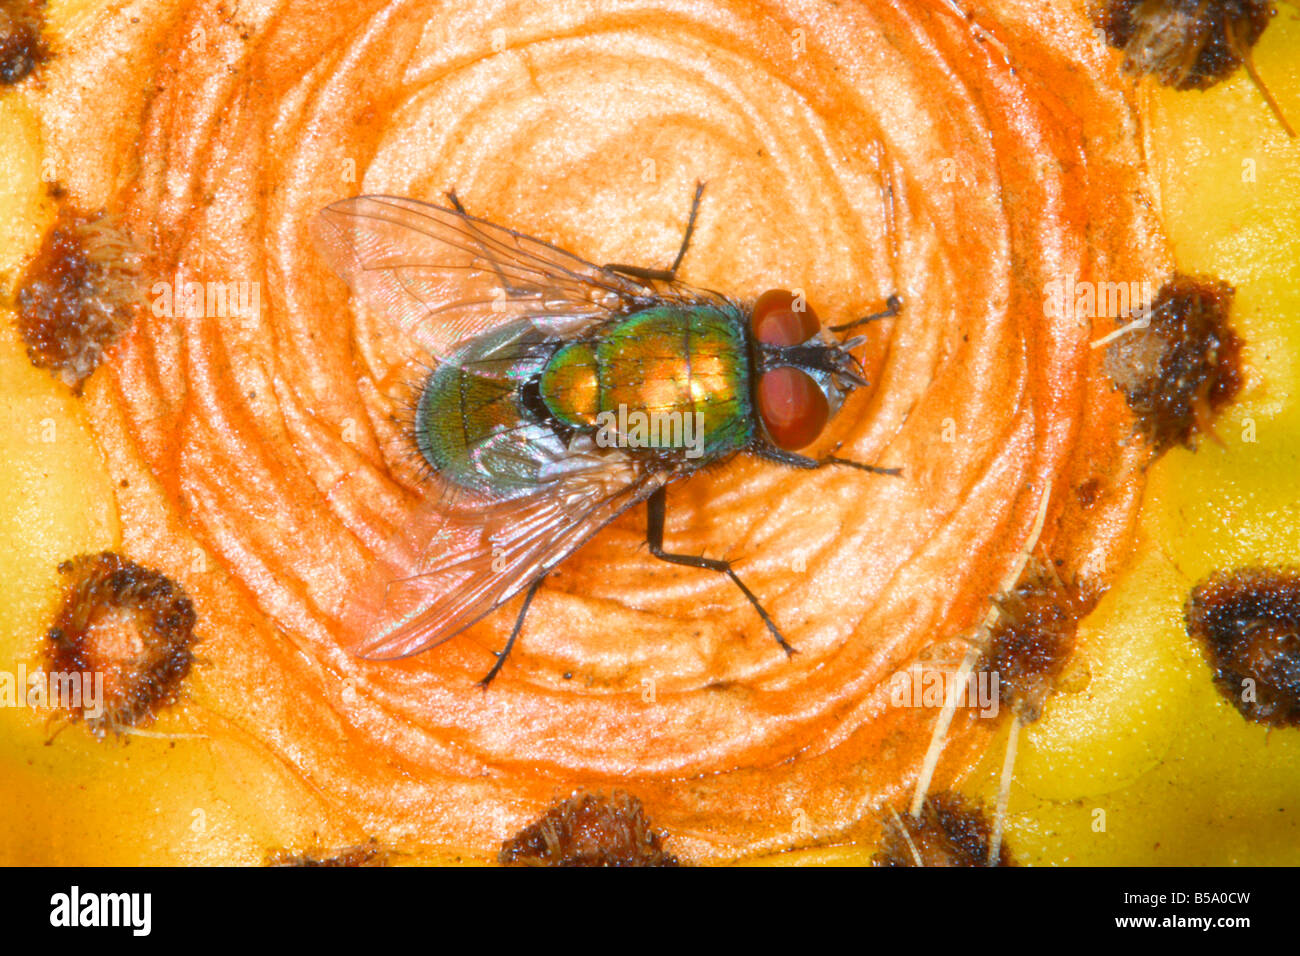 Greenbottle Fly (Lucilia caesar) On Prickly-pear fruit, (Opuntia ficus-indica) Stock Photo